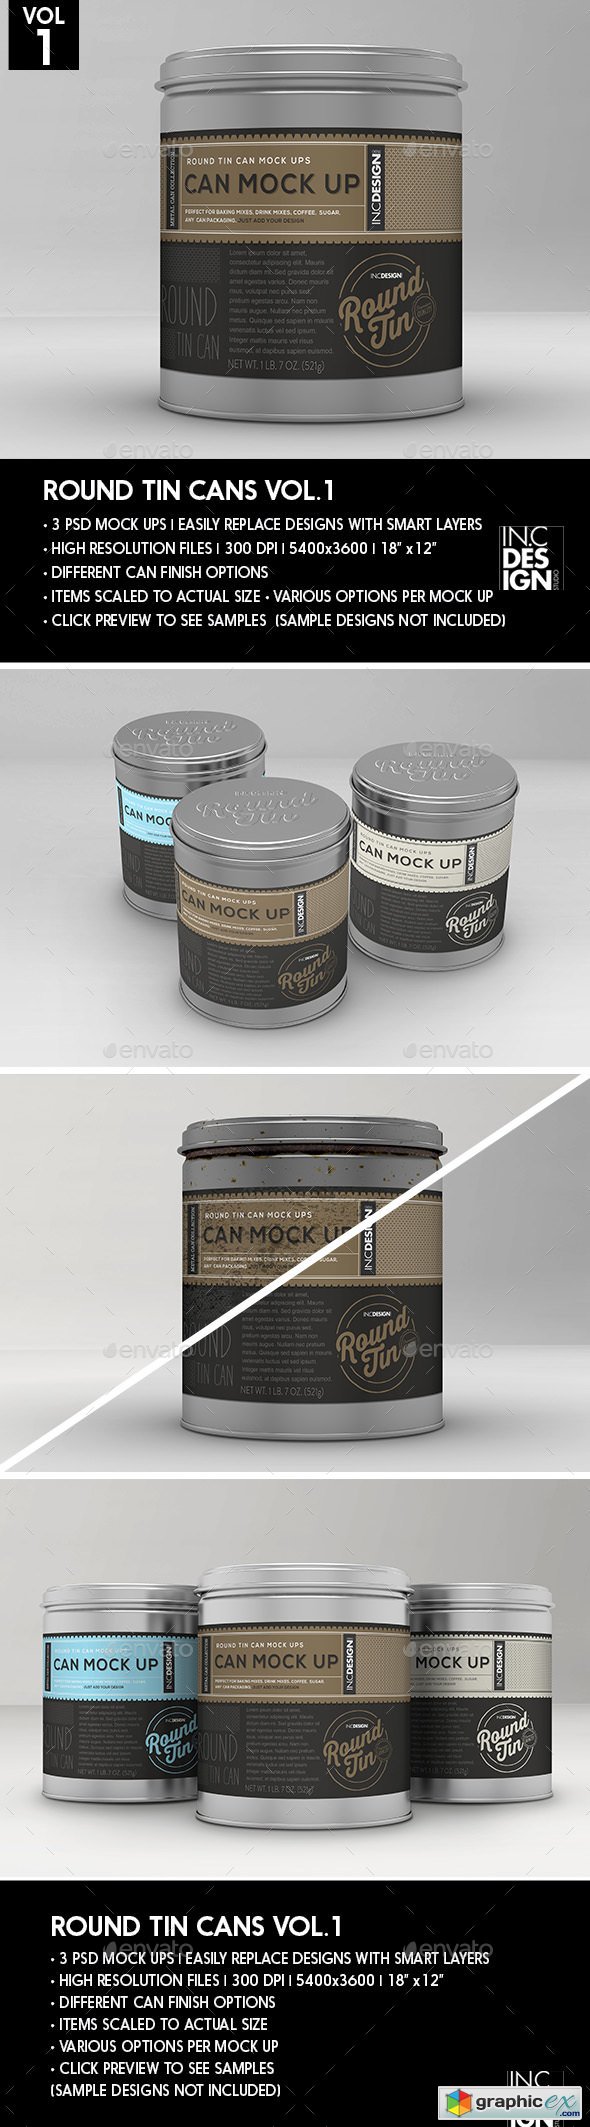 Round Tin Cans Vol.1 Packaging Mock Ups